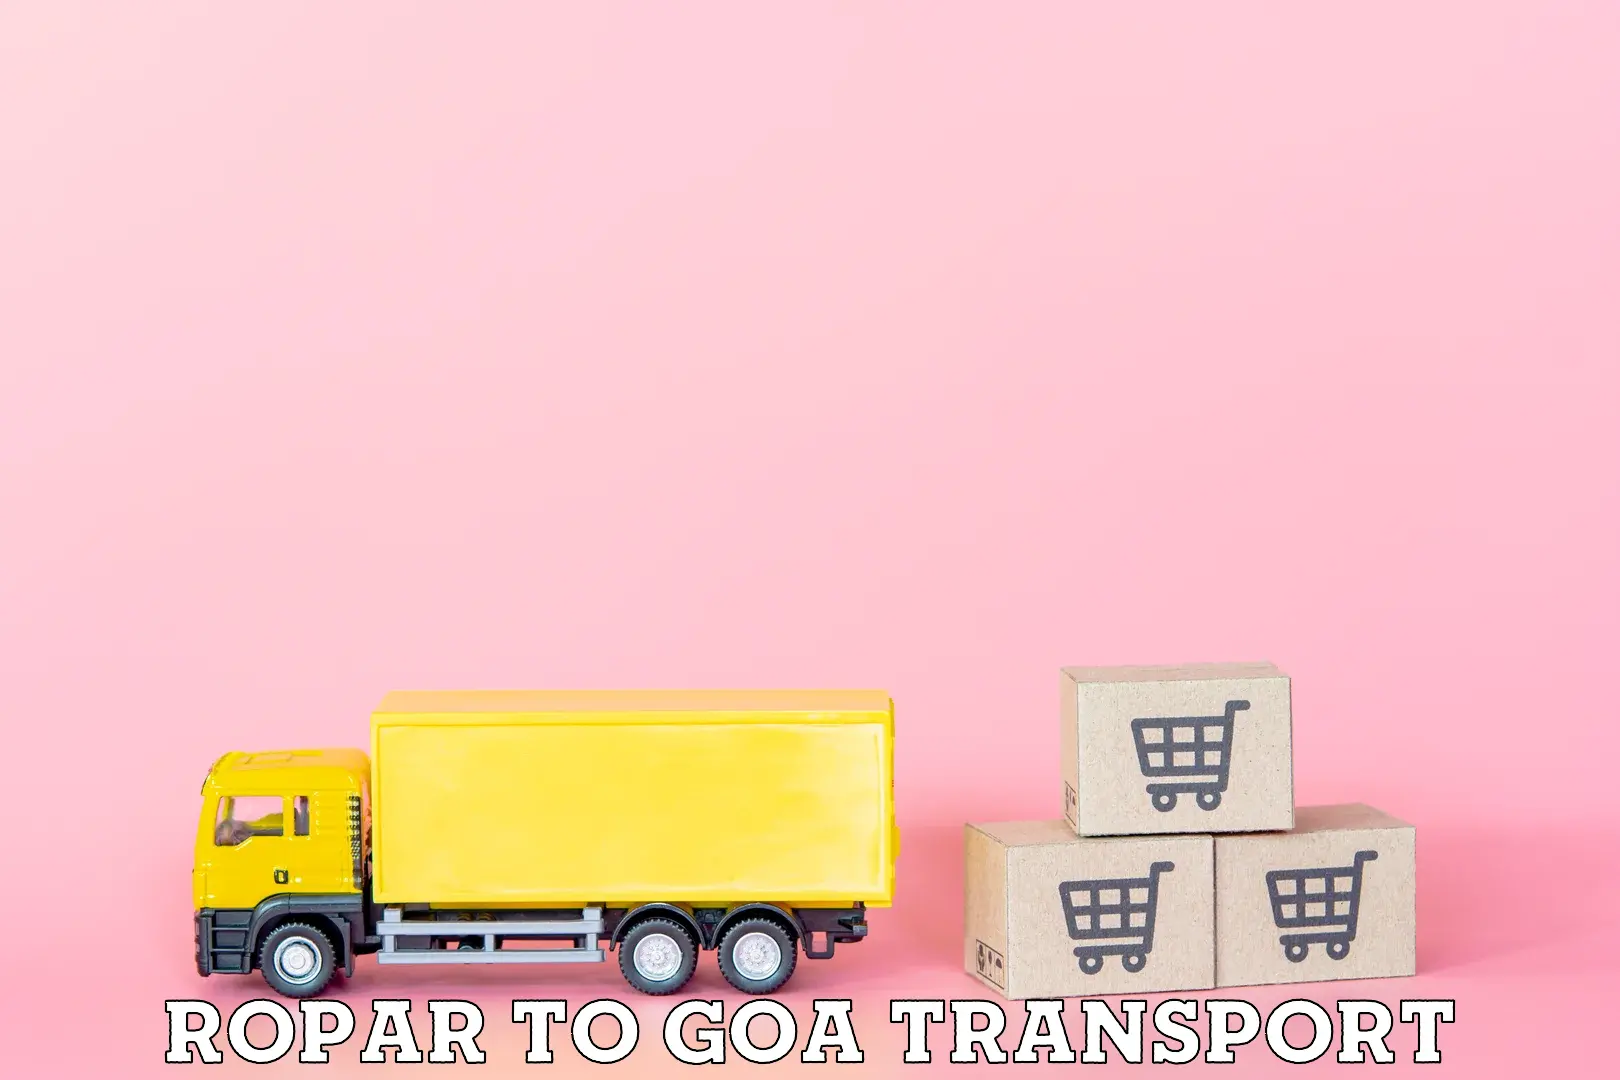 Transport in sharing Ropar to IIT Goa